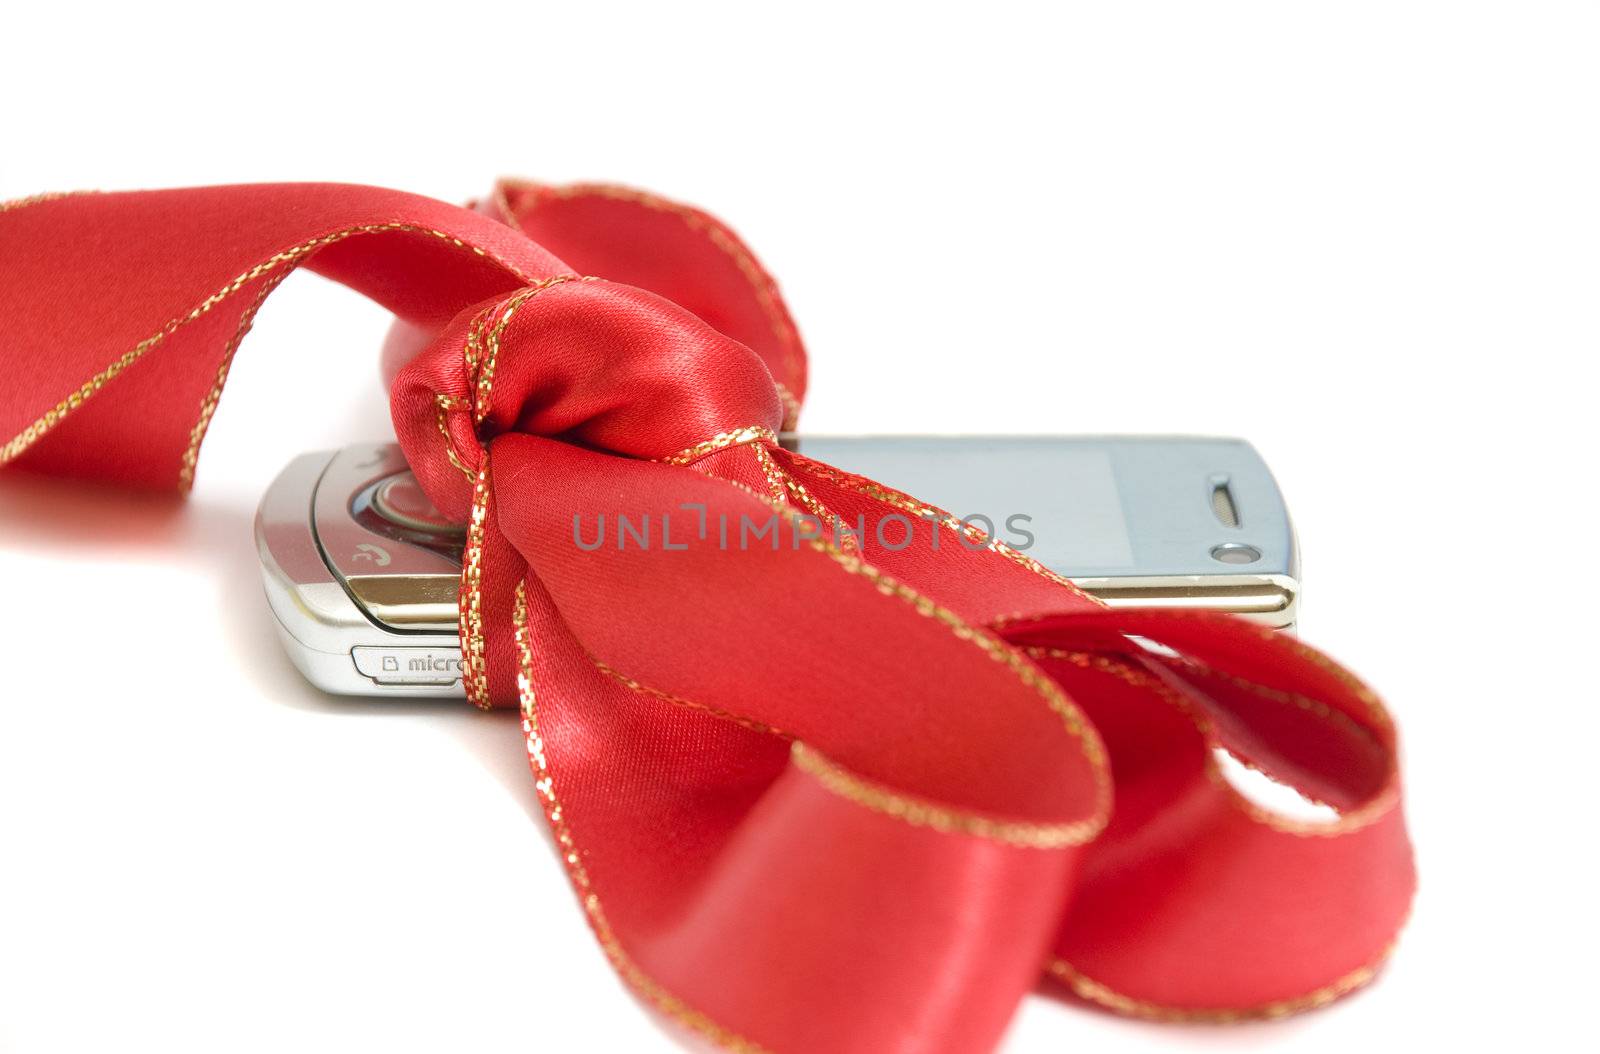 close-up on a brand new shiny mobile phone, isolated on white